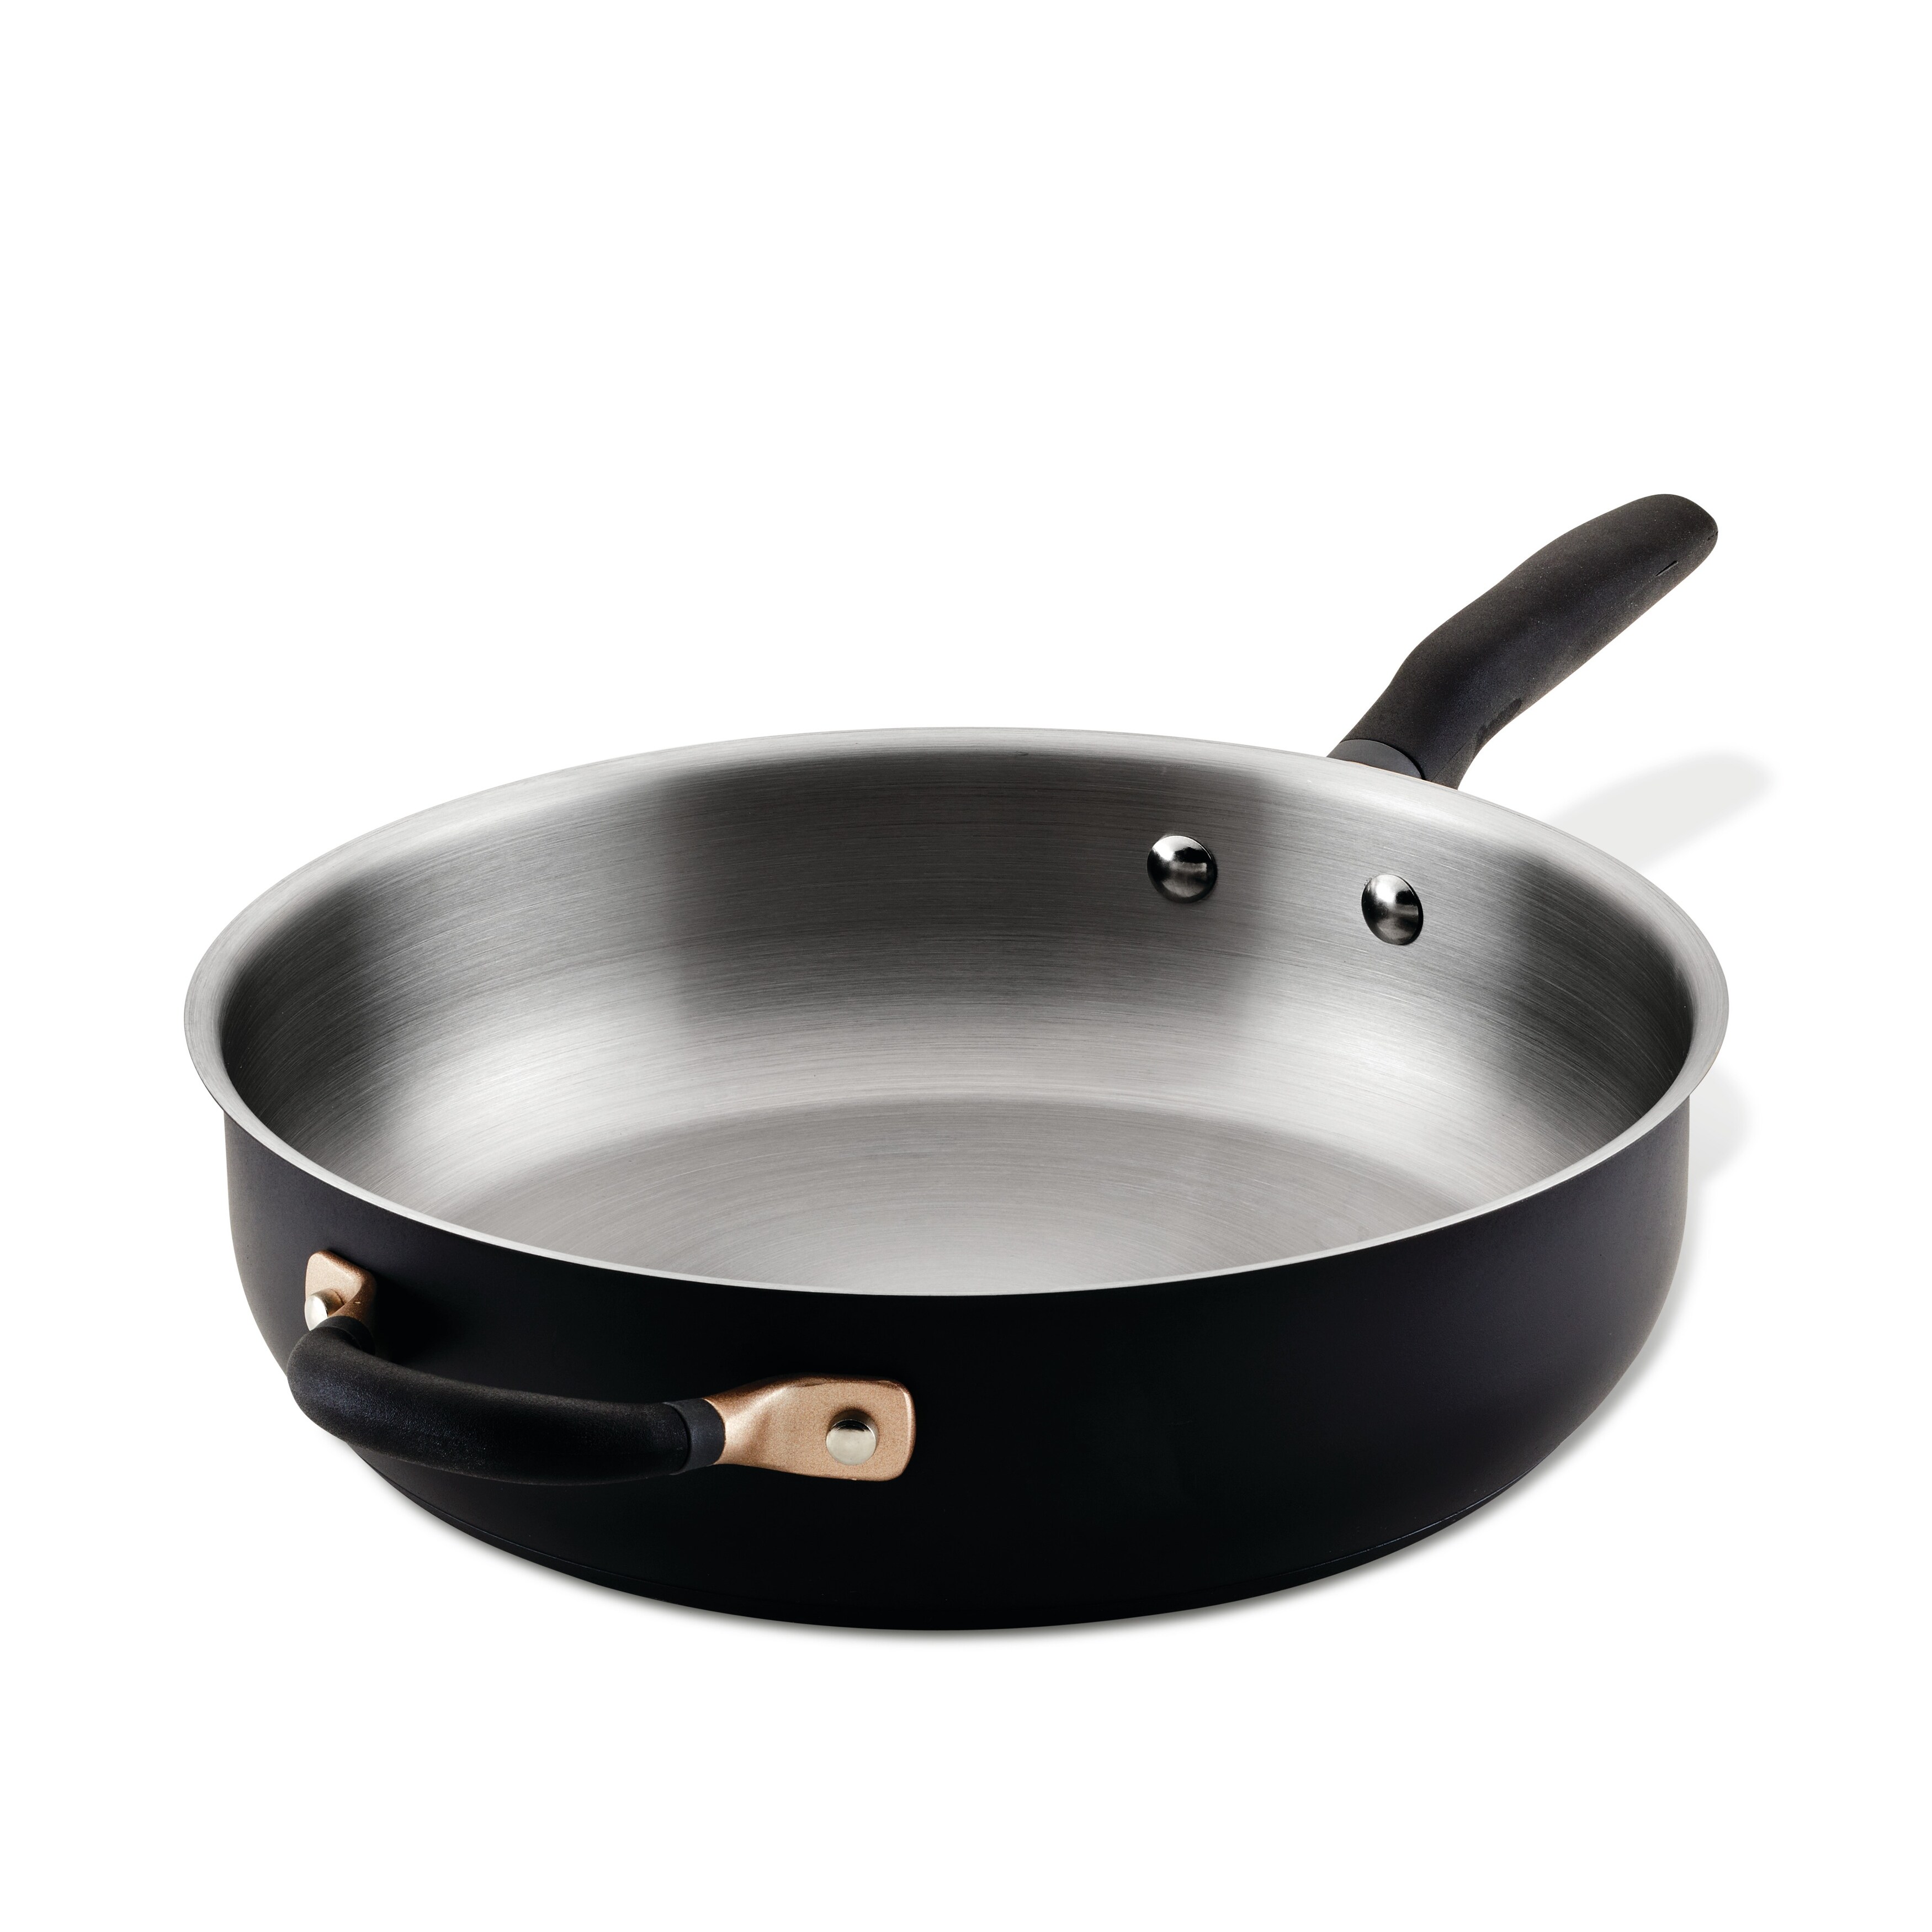 https://ak1.ostkcdn.com/images/products/is/images/direct/fef121a2accb43a13b7bdc50696ba8bdc71e9a4e/Meyer-Accent-Series-Stainless-Steel-Induction-Saute-Pan%2C-4.5-Quart%2C-Matte-Black.jpg